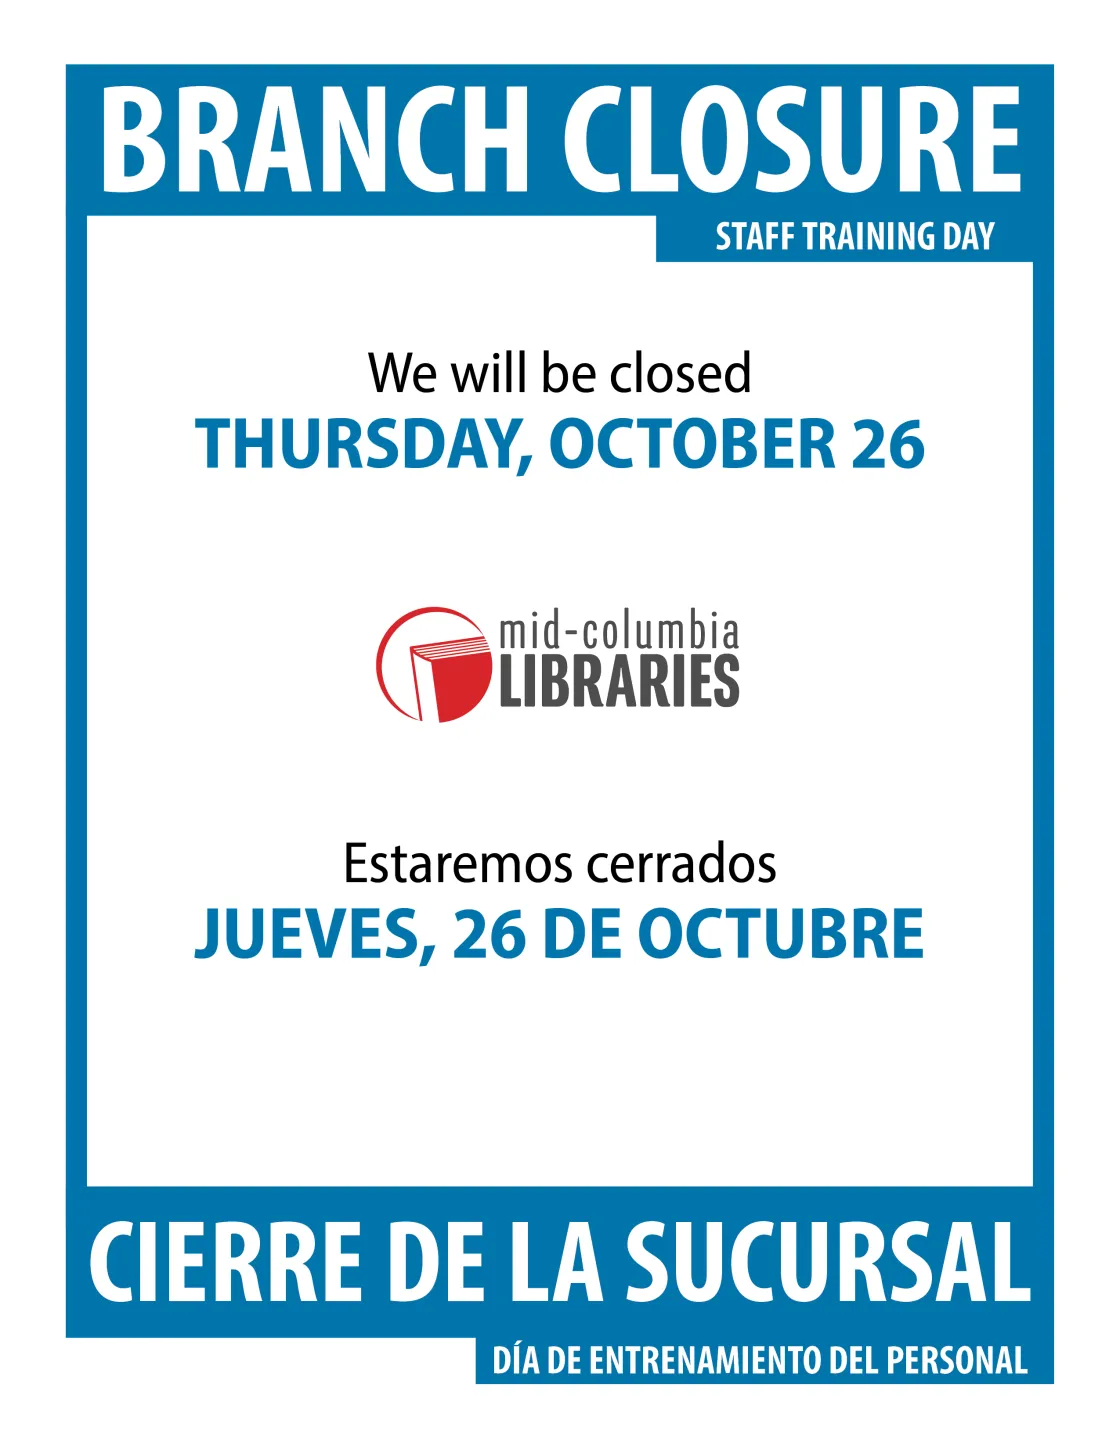 All Mid-Columbia Libraries branches will be closed Thursday, Oct. 26 for Staff Training Day.